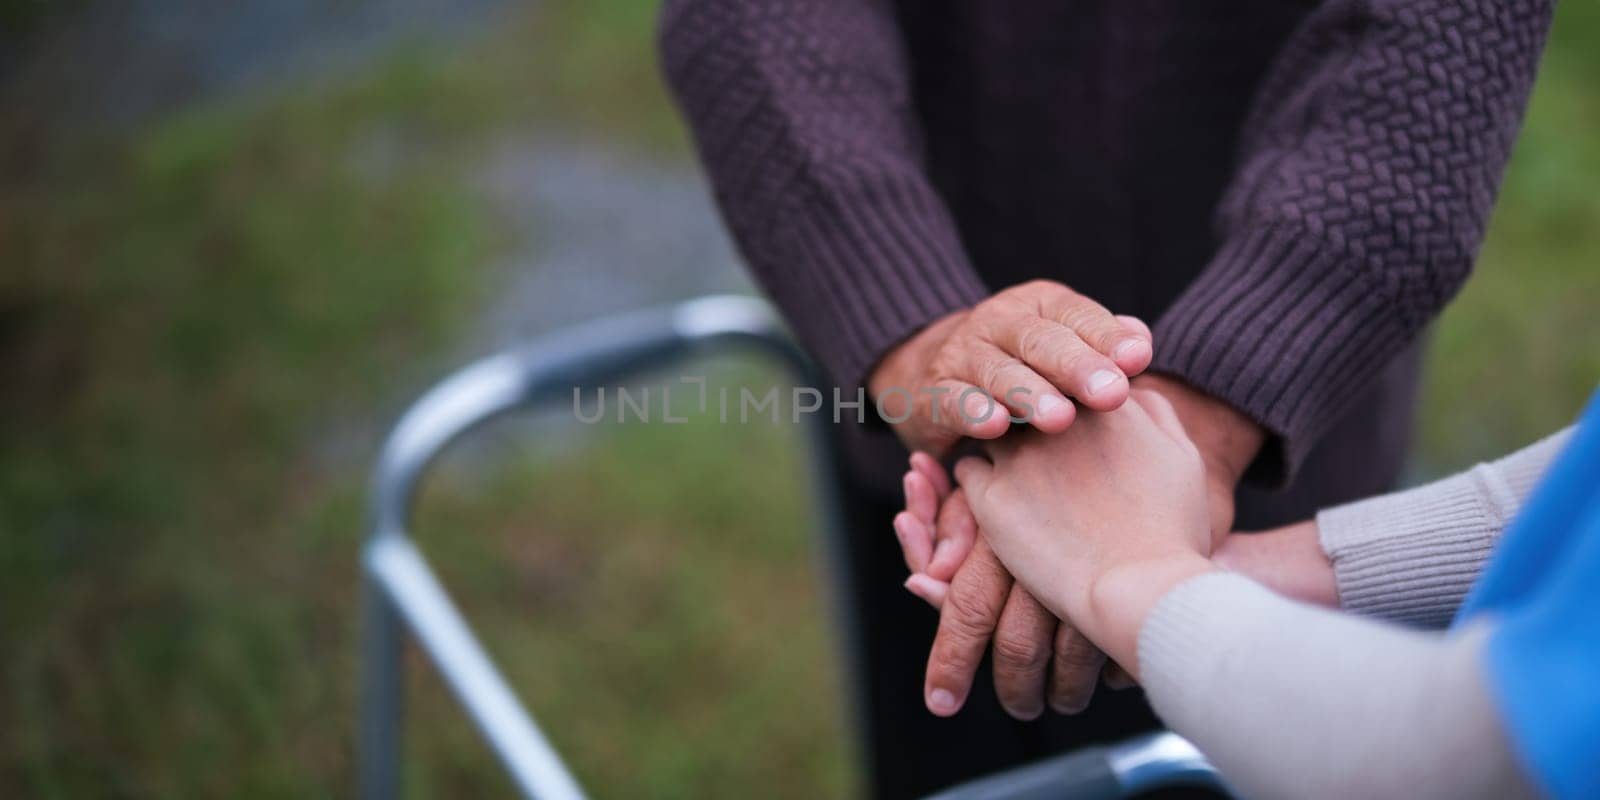 Empathy, trust and nurse caregiver holding hands with patient. consulting support and healthcare advice. Kindness, counseling and medical therapy in nursing home for hope, consultation and psychology.